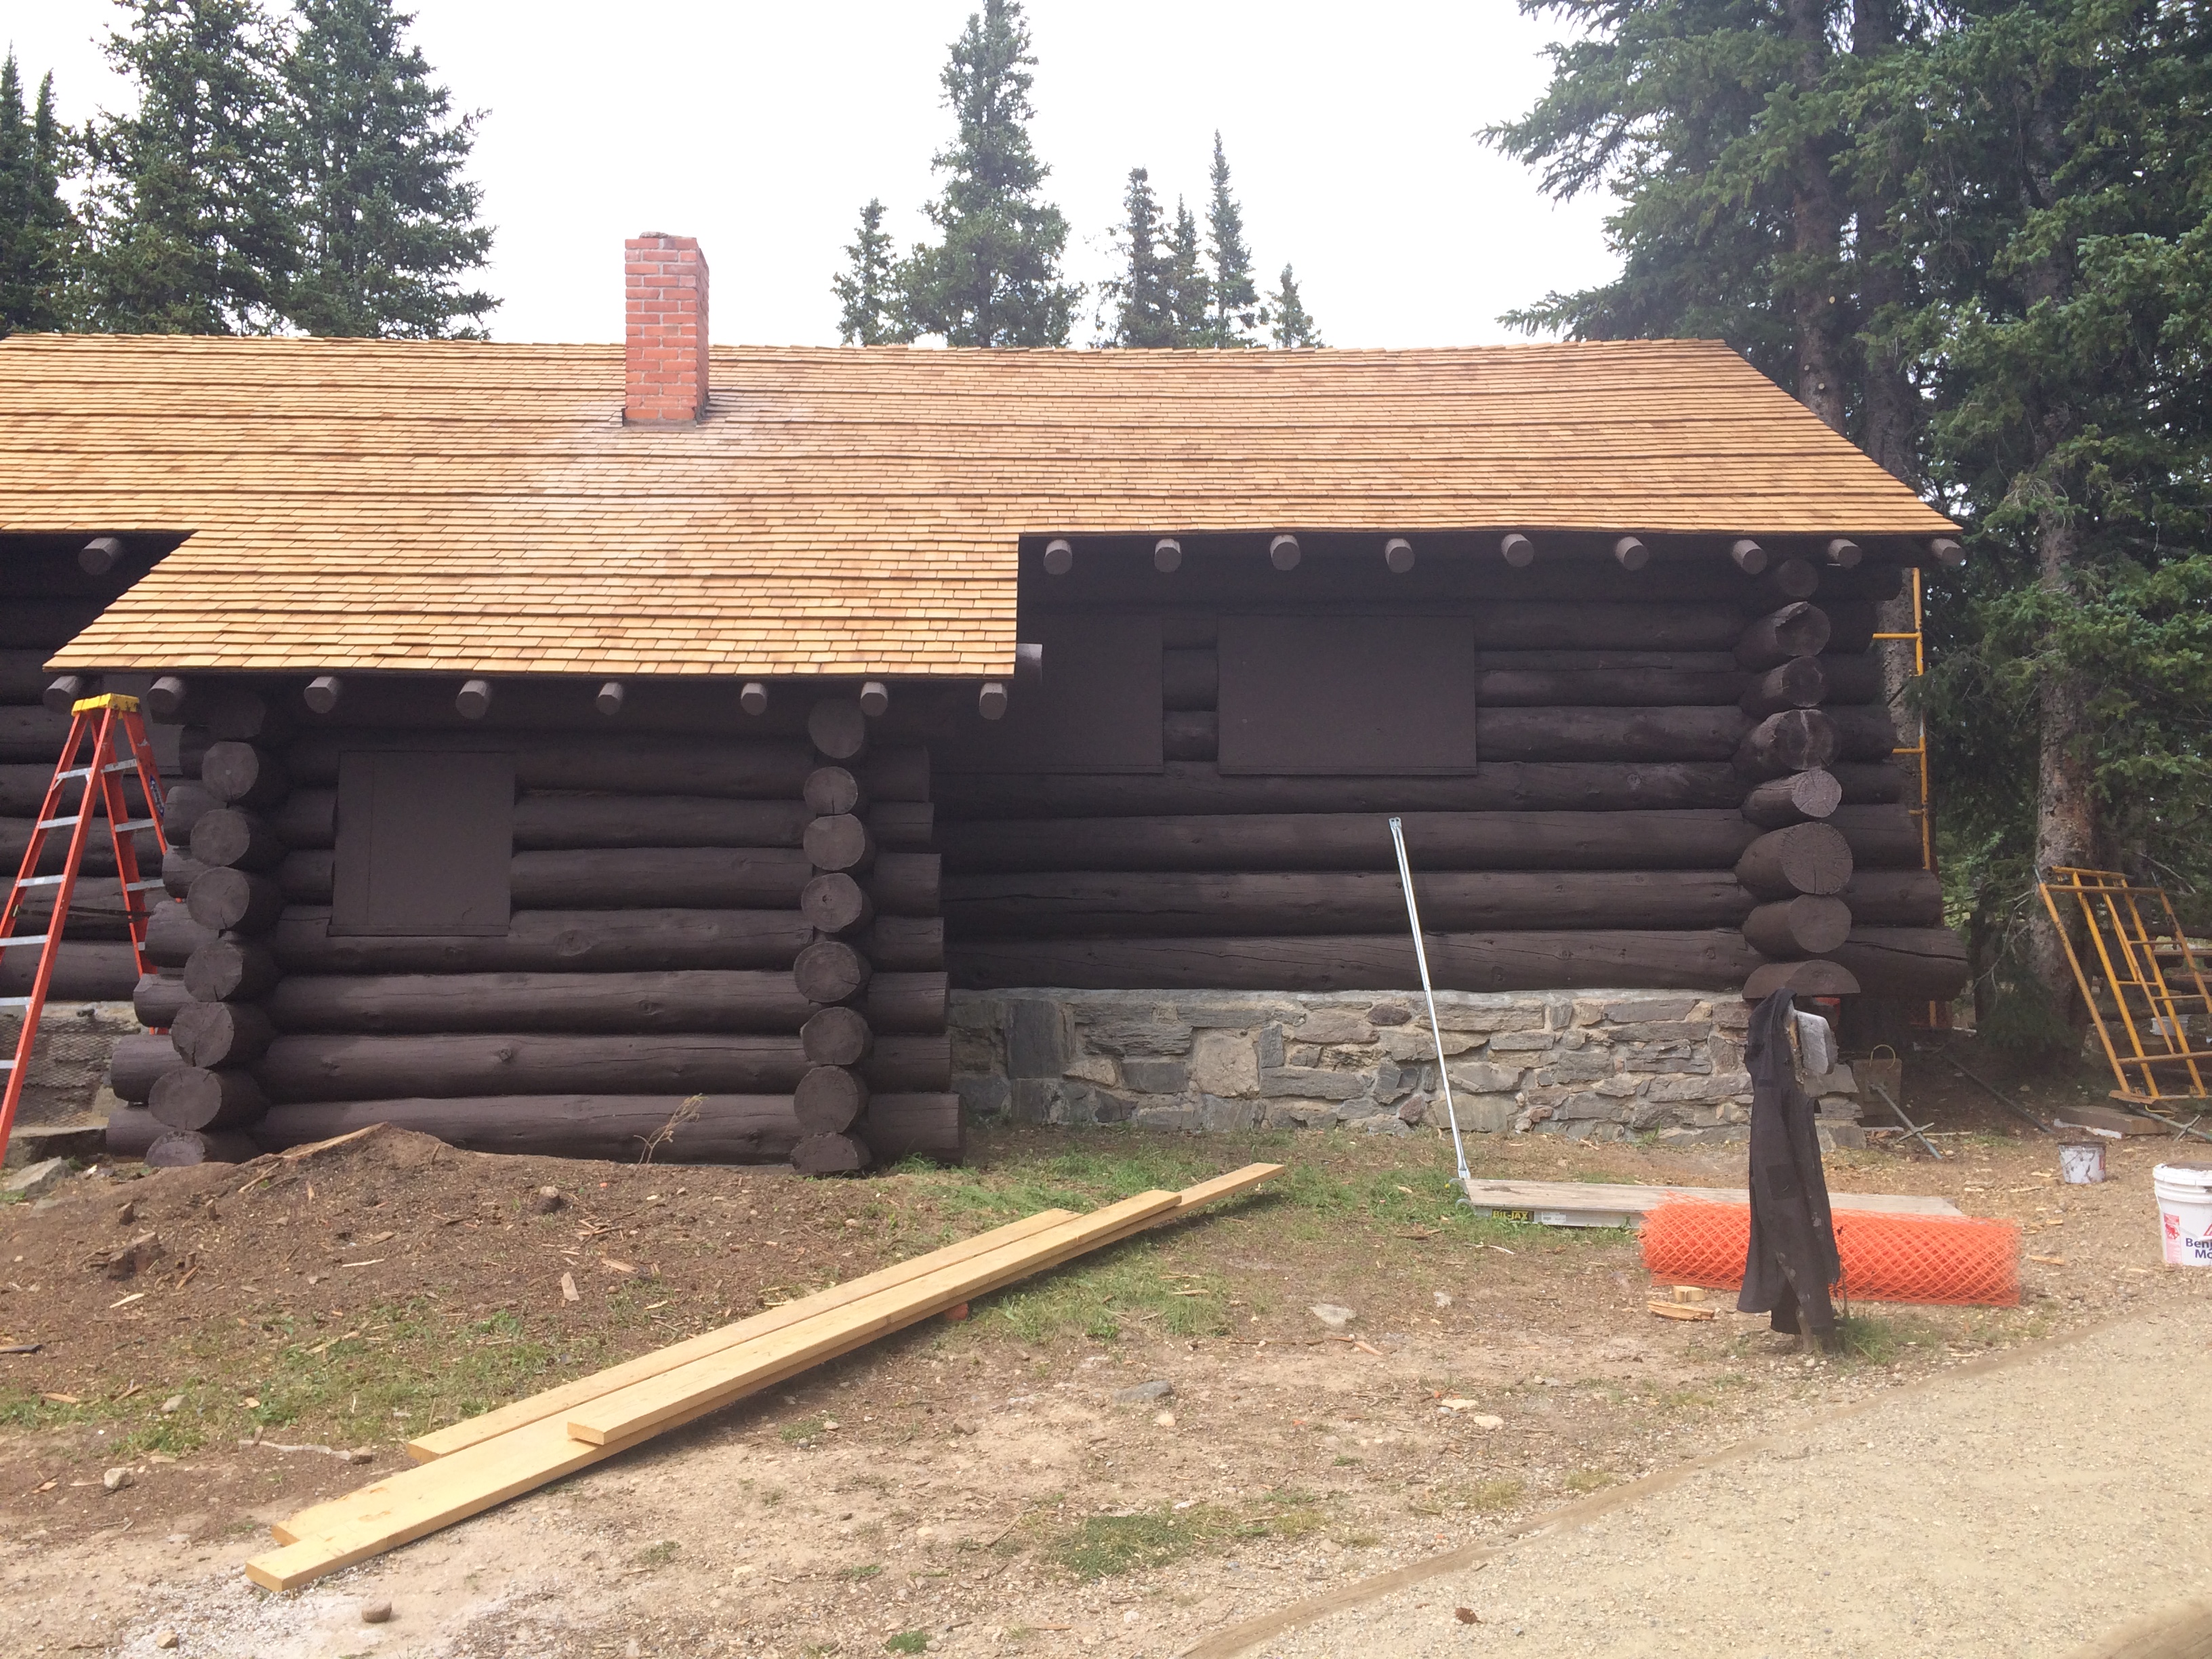 The finished south side of Lake Irene Mess Hall with new shingles, rafter tails, and paint. 